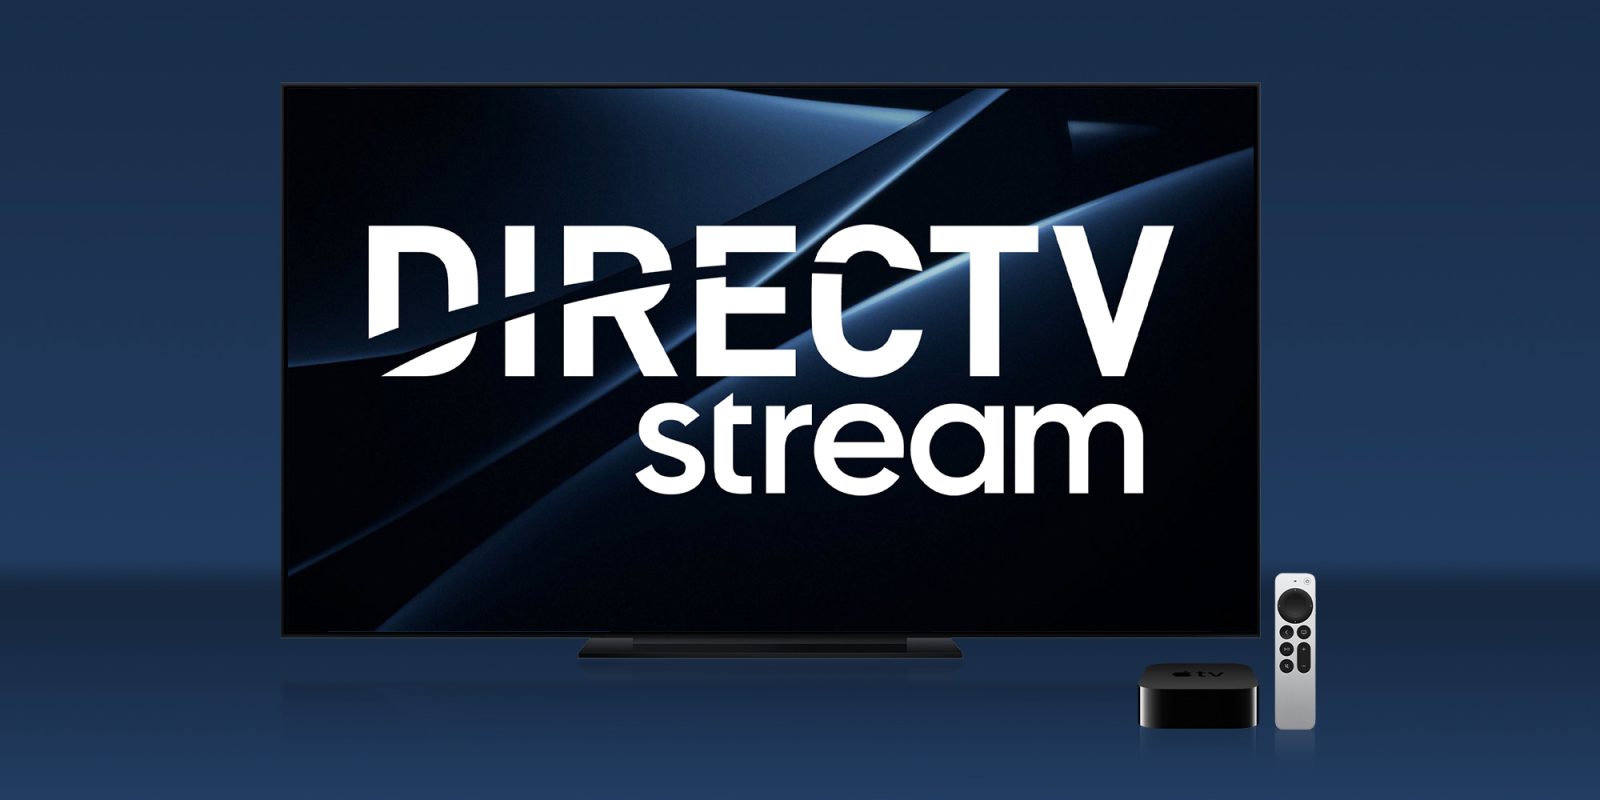 Your Favorite discovery+ Shows Are Now On DIRECTV